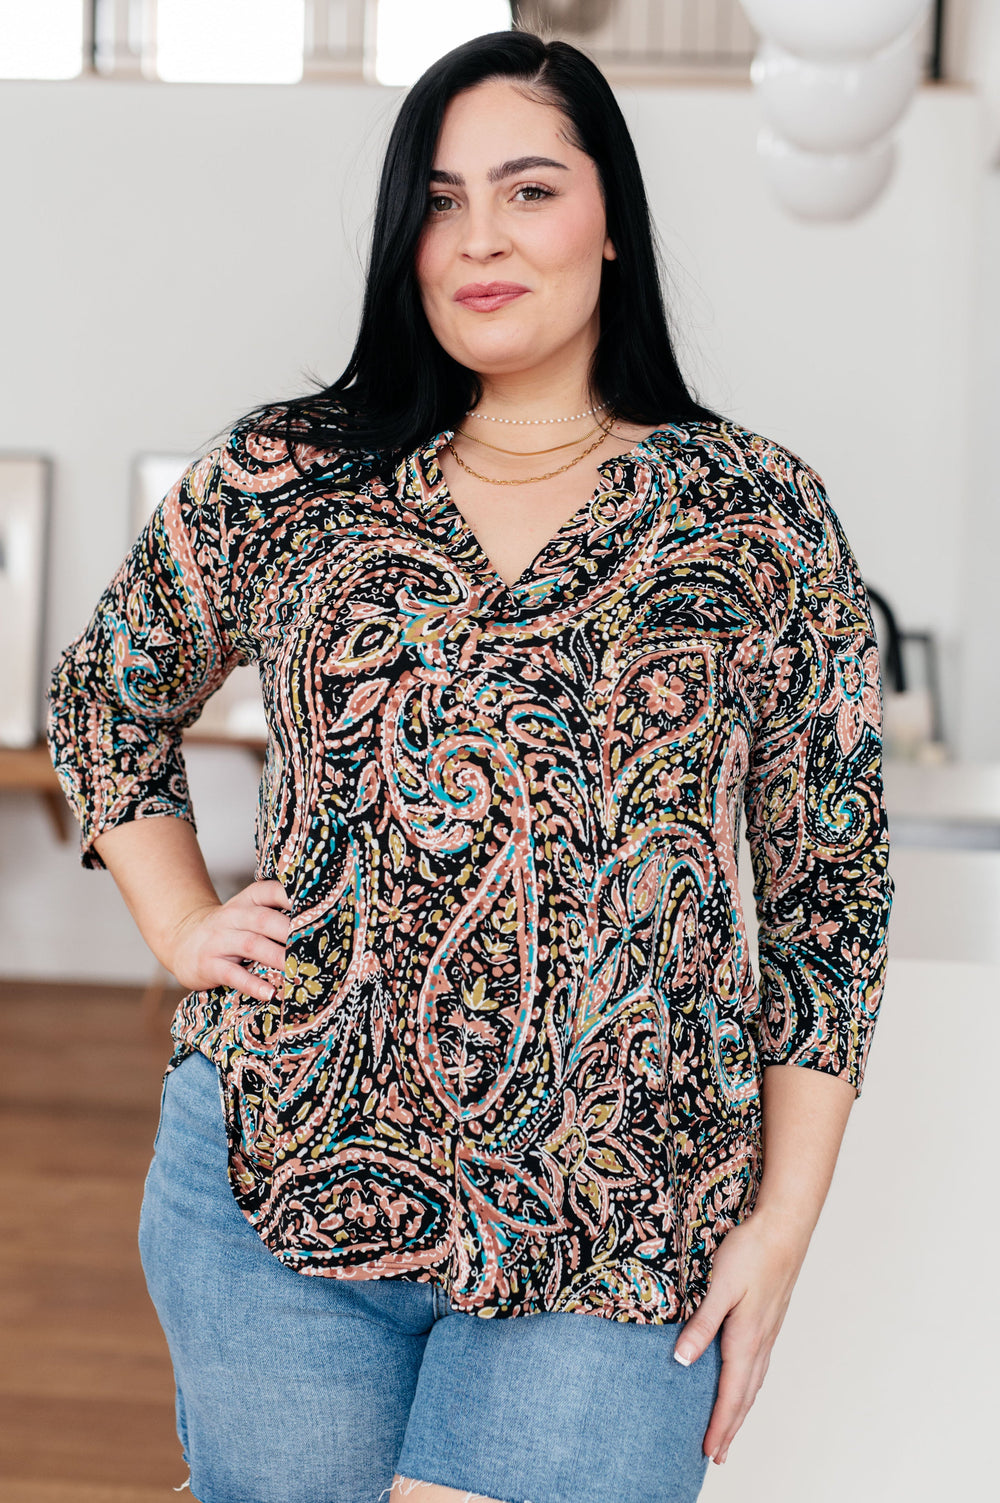 I Think Different Top Teal Paisley-Long Sleeve Tops-Inspired by Justeen-Women's Clothing Boutique in Chicago, Illinois